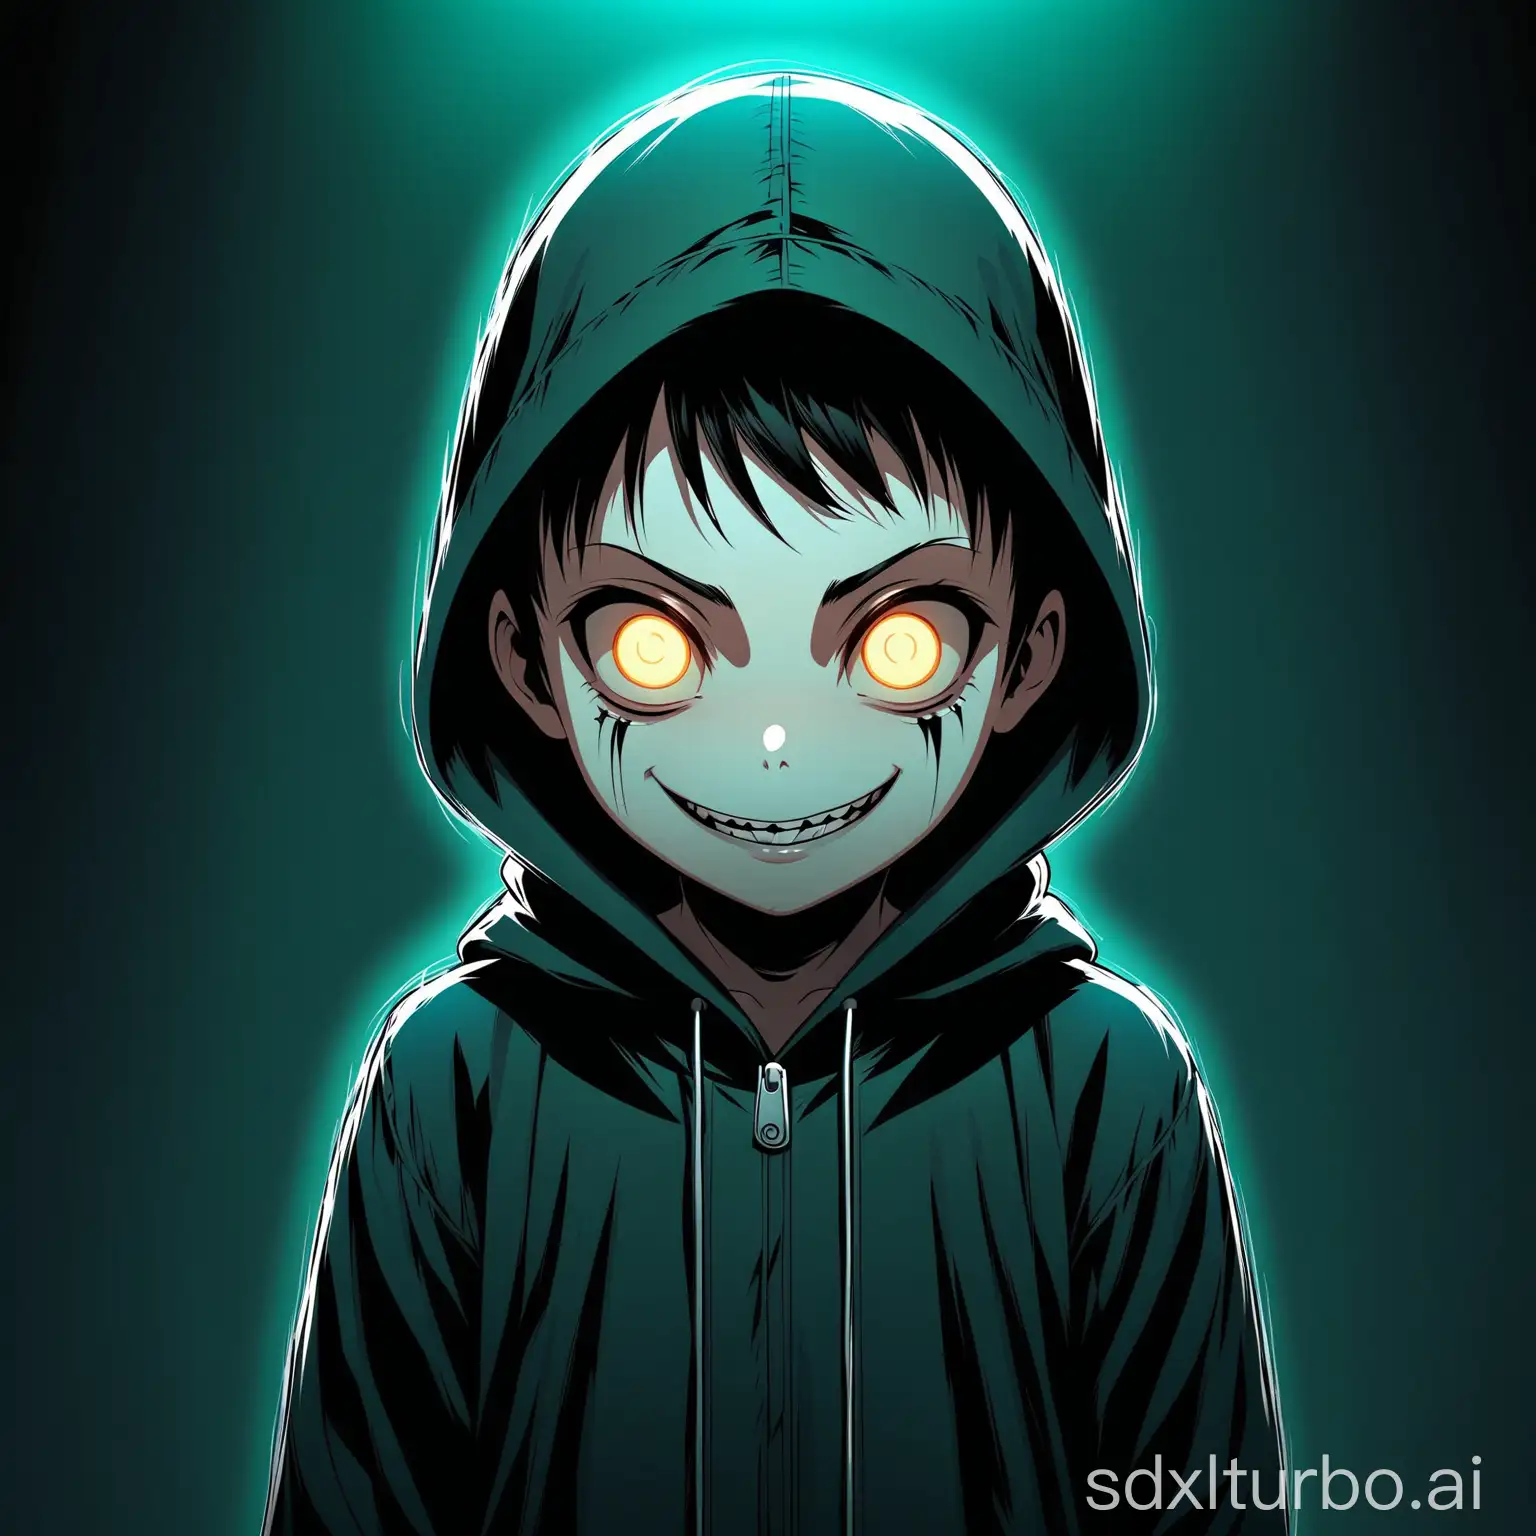 Creepy-Little-Boy-Kid-with-Dark-and-Scary-Eyes-and-Smile